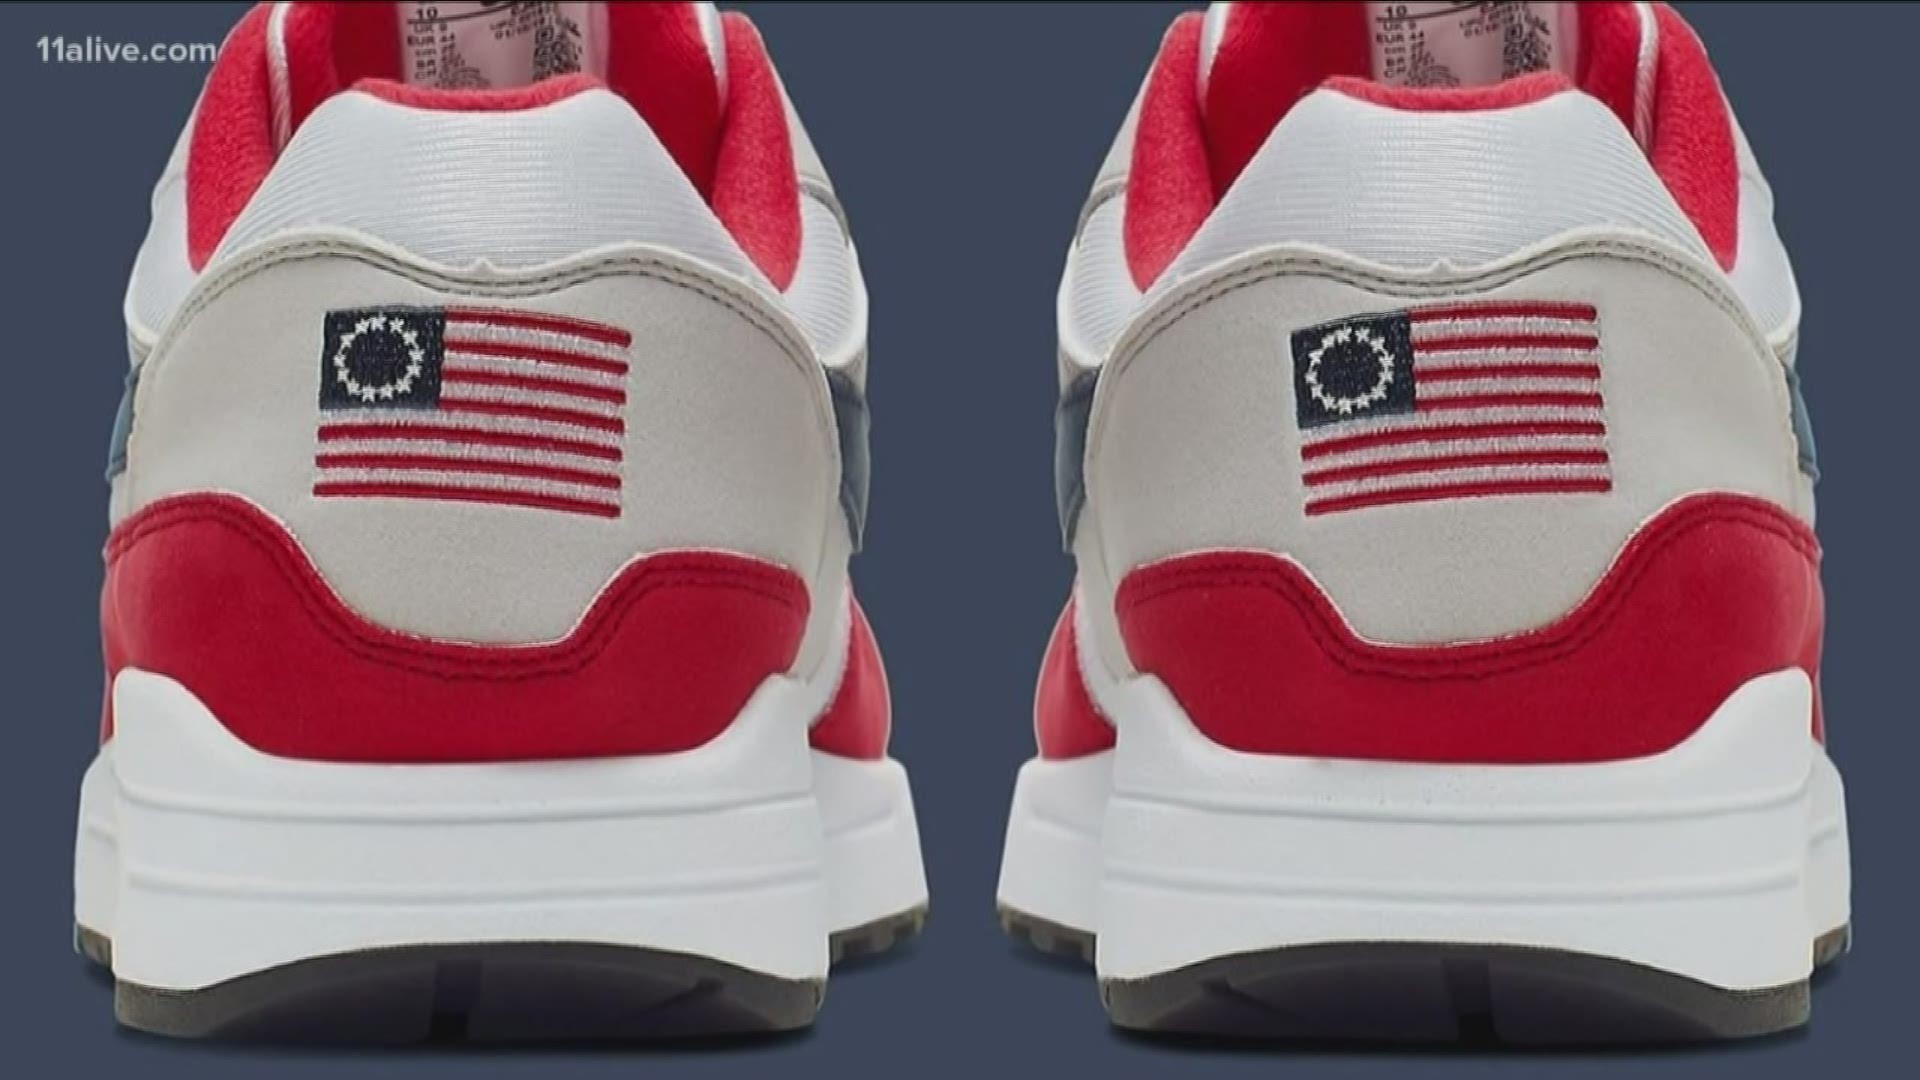 Why the Betsy Ross flag on Nike shoes 